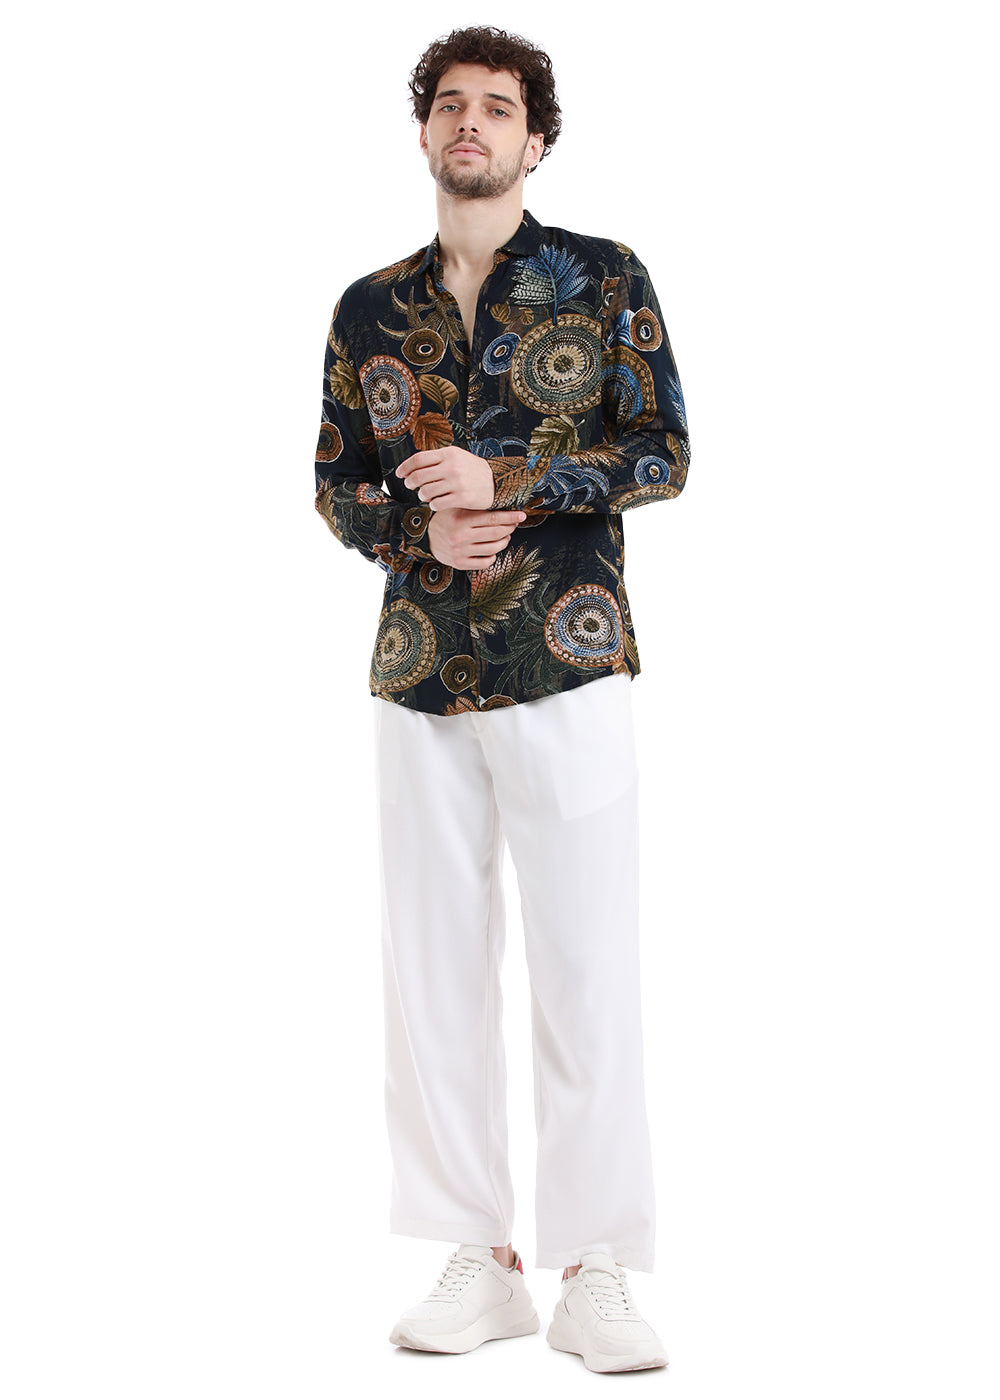 Areca Rustic Brown Feather Shirt